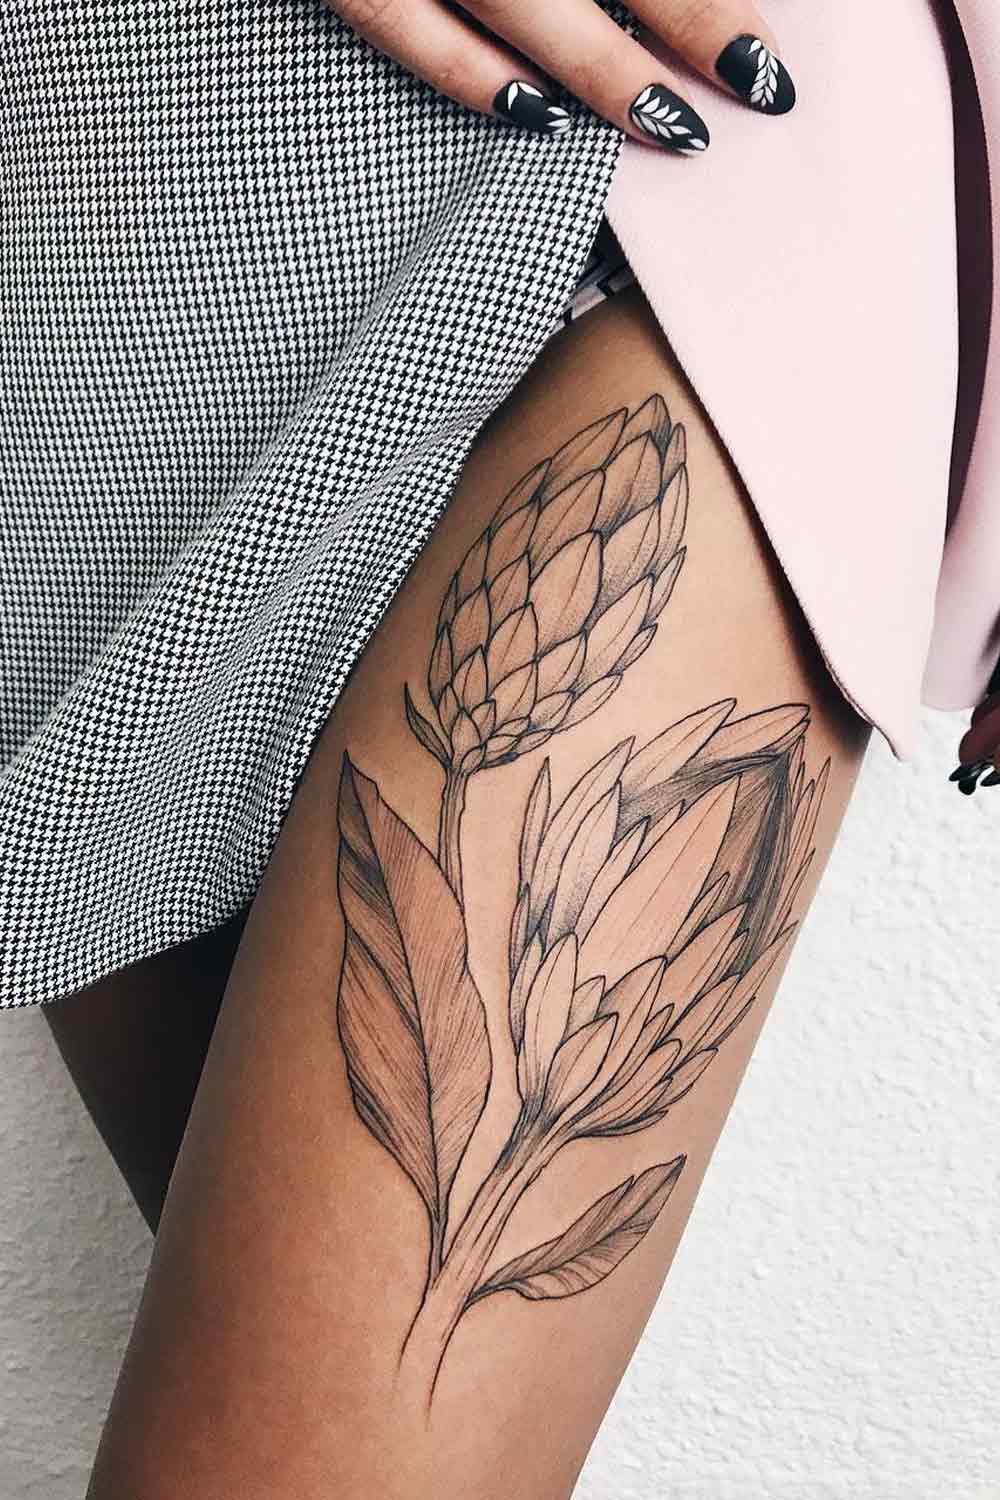 Thigh Tattoos: Everything You Need To Know About - Glaminati